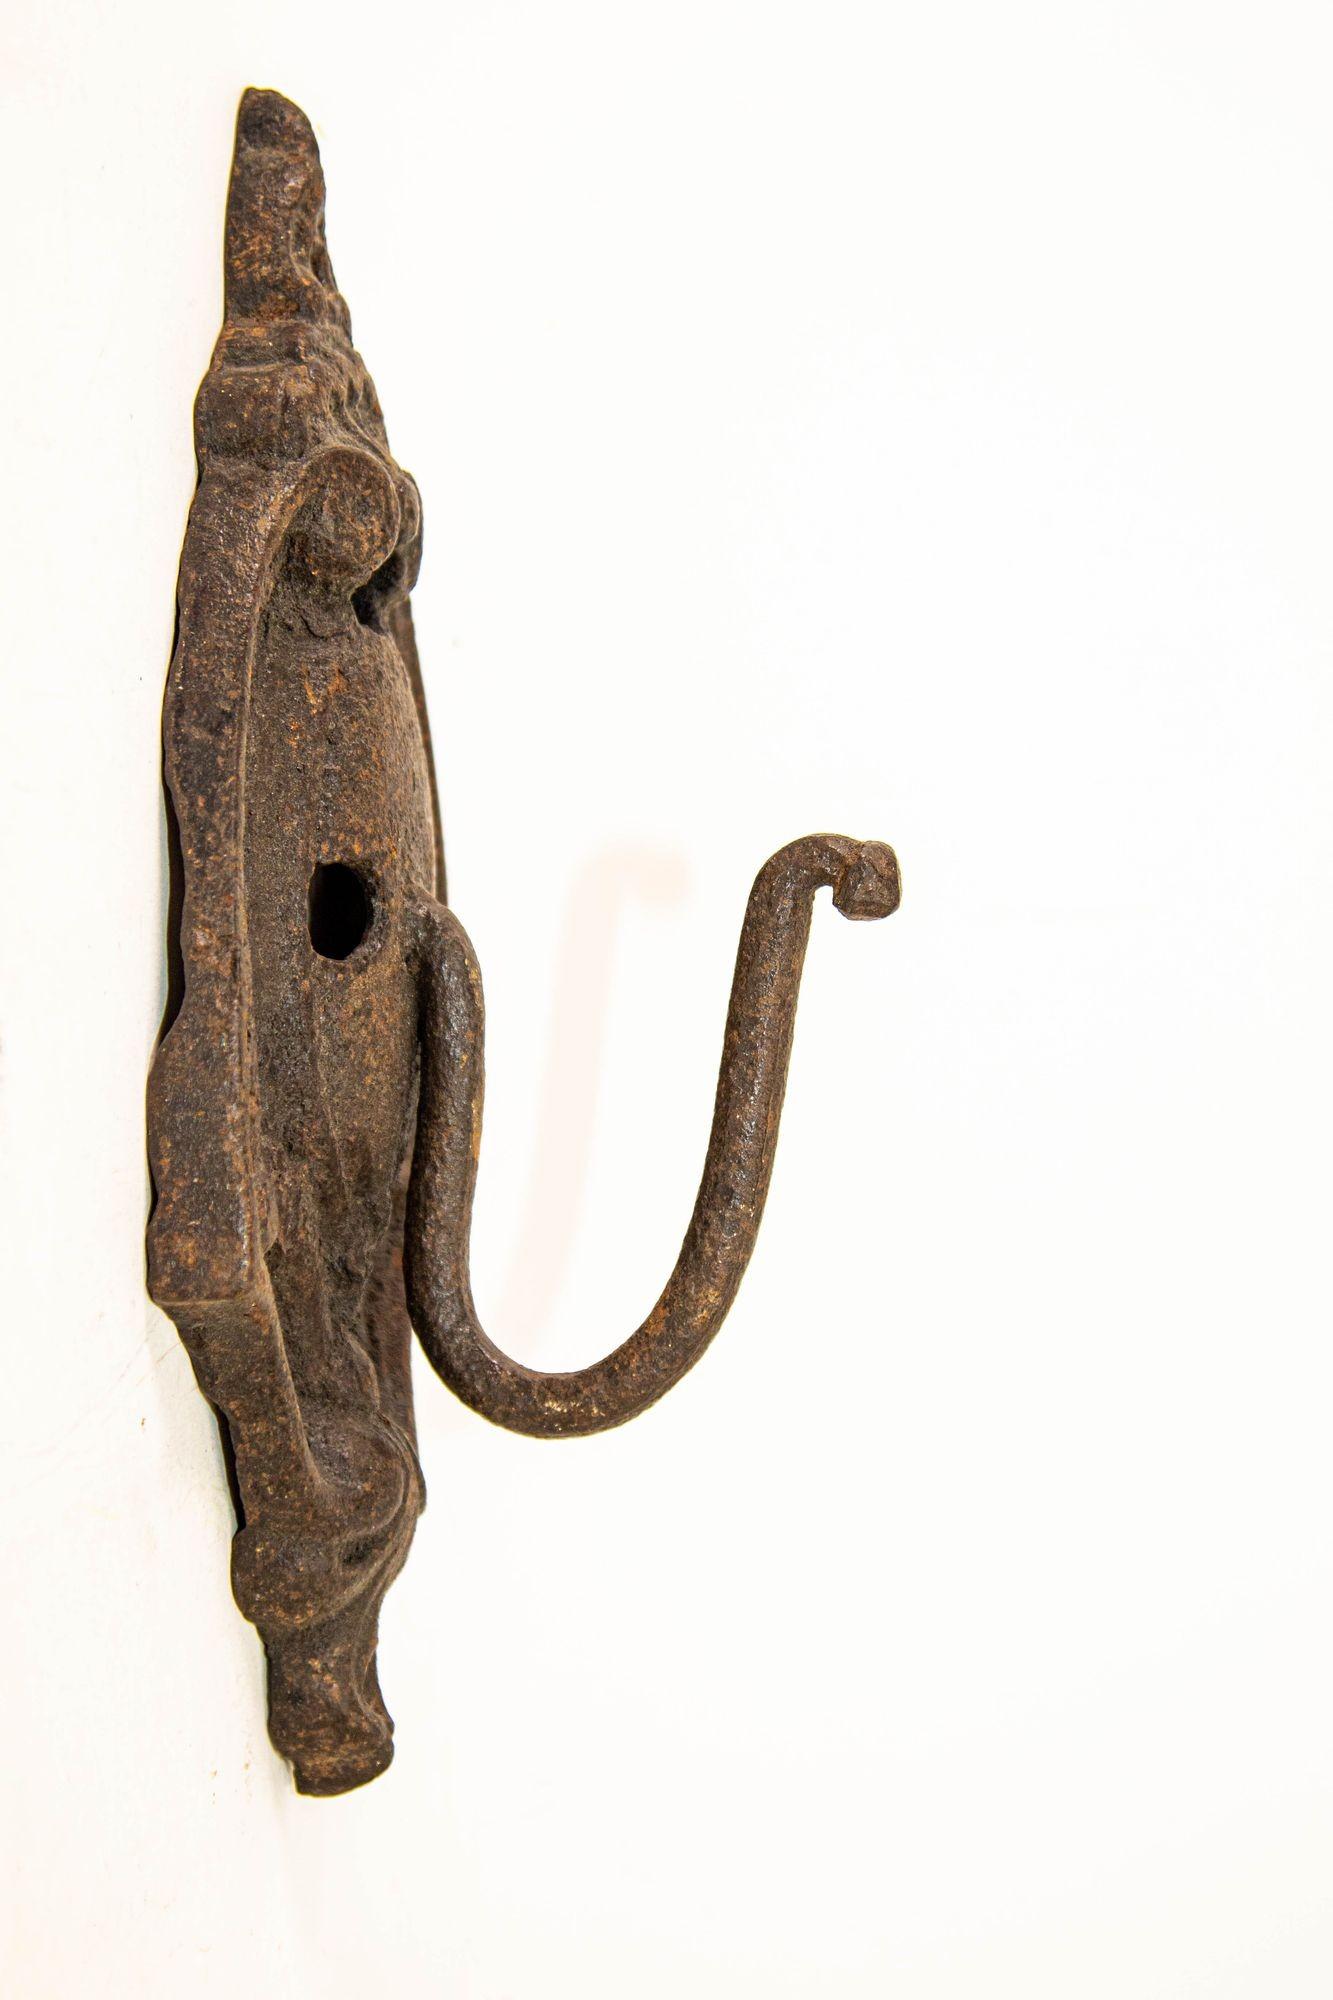 Antique Cast Iron Metal Wall Coat Hook Hanger Hardware.
This is a very unique style for a wall coat hook.
It is supported by an ornate back plate which is 10